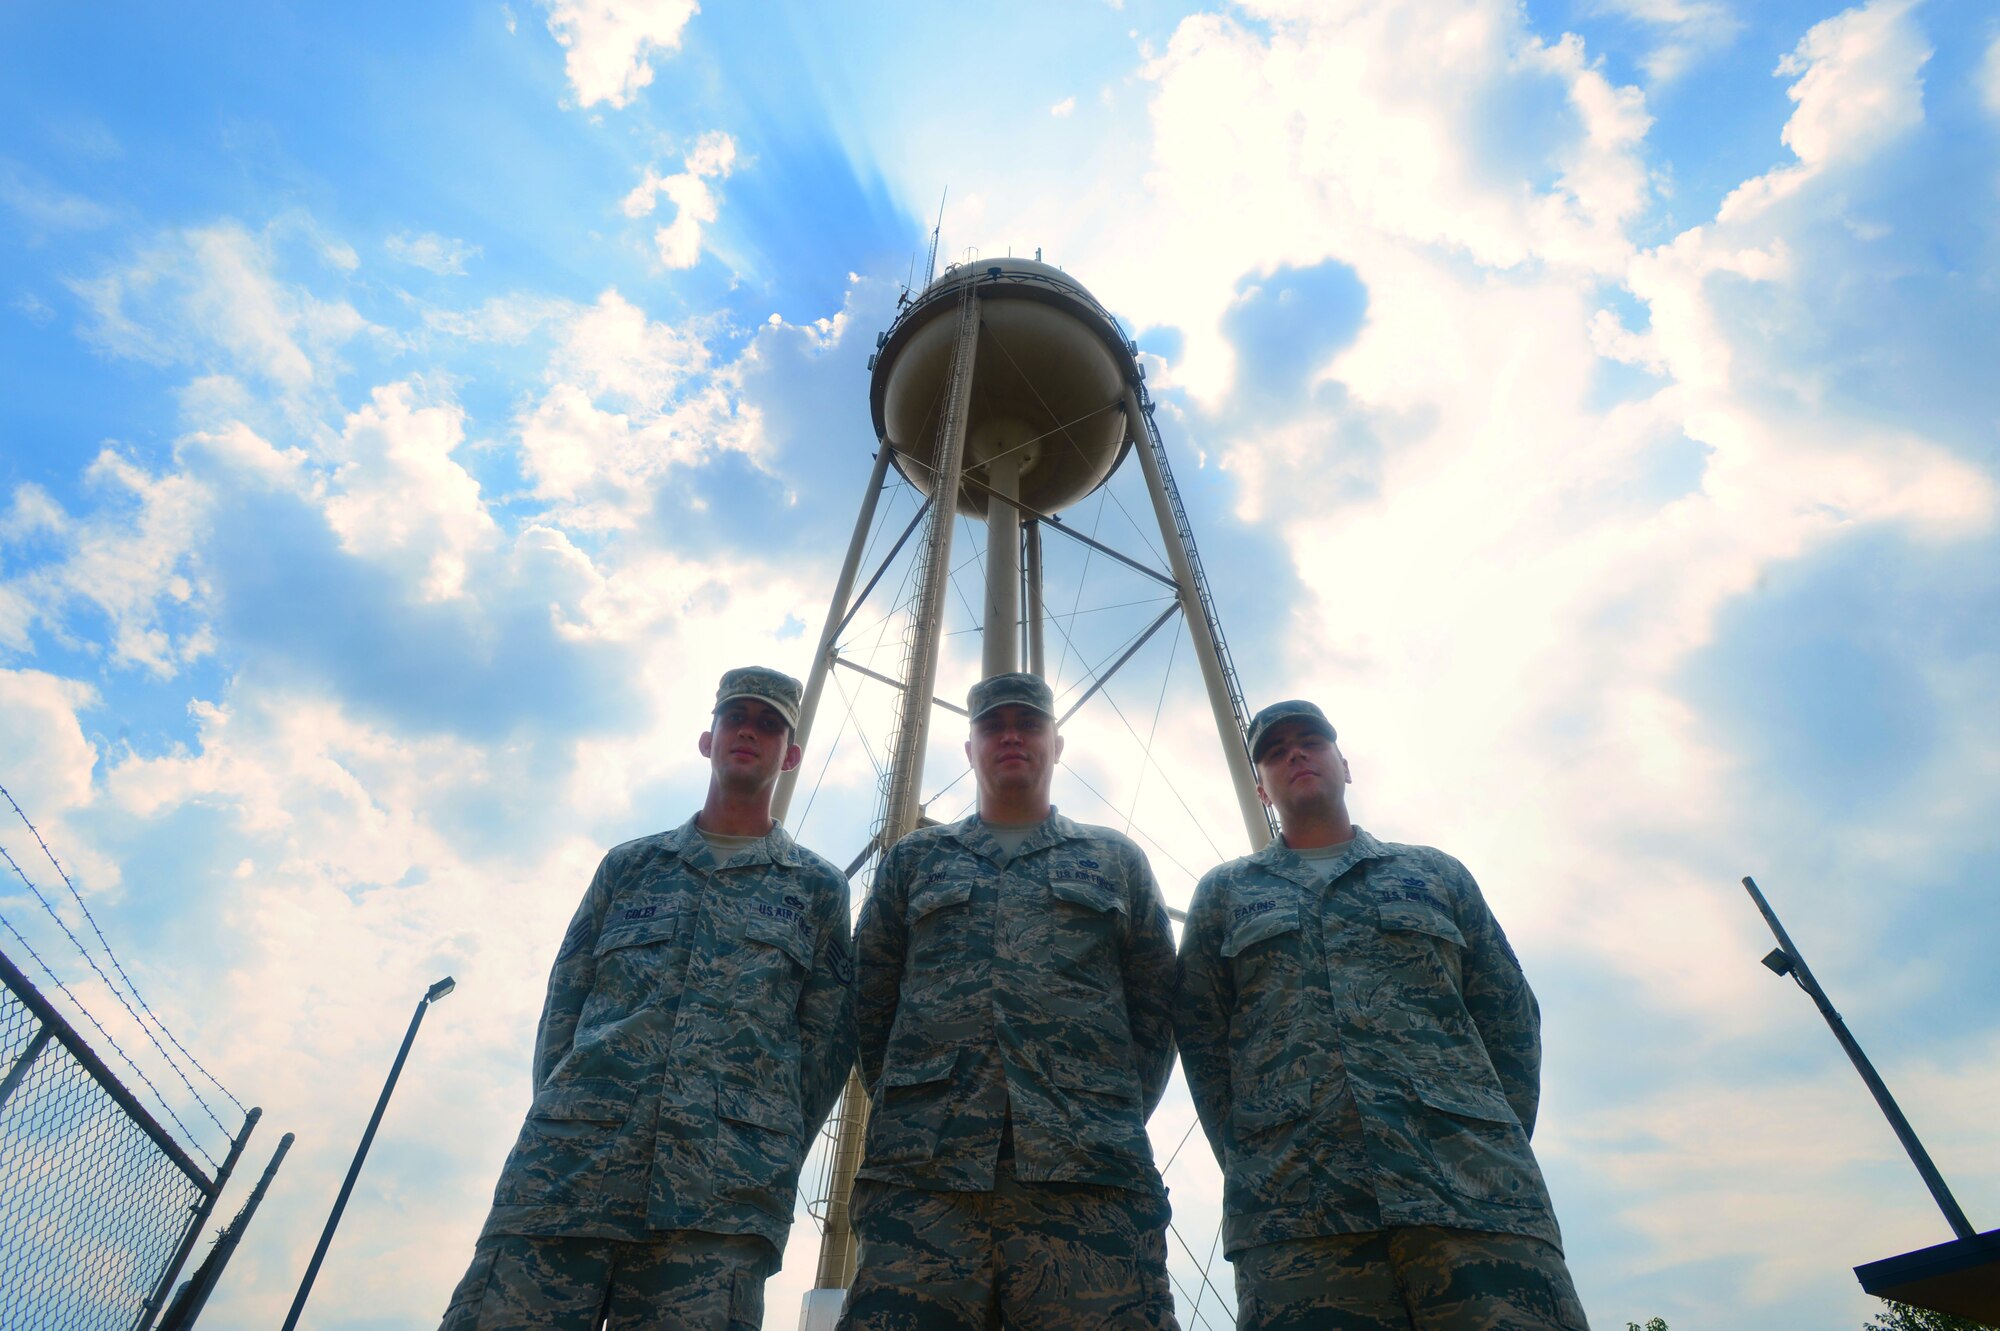 [From left] U.S. Air Force Staff Sgt. Phillip Coley, 20th Civil Engineer Squadron water and fuels systems maintenance craftsman, Staff Sgt. Brian Joki, 20th CES water operations supervisor, and Tech. Sgt. Christopher Eakins, 20th CES WFSM craftsman, stand in front of a water tower at Shaw Air Force Base, S.C., July 8, 2014. Handling more than half a million feet of gas, sewer and water lines, these three Airmen along with 21 additional Airmen maintain all water, gas and sewer related items. U.S. Air Force photo by Airman 1st Class Jensen Stidham/Released)